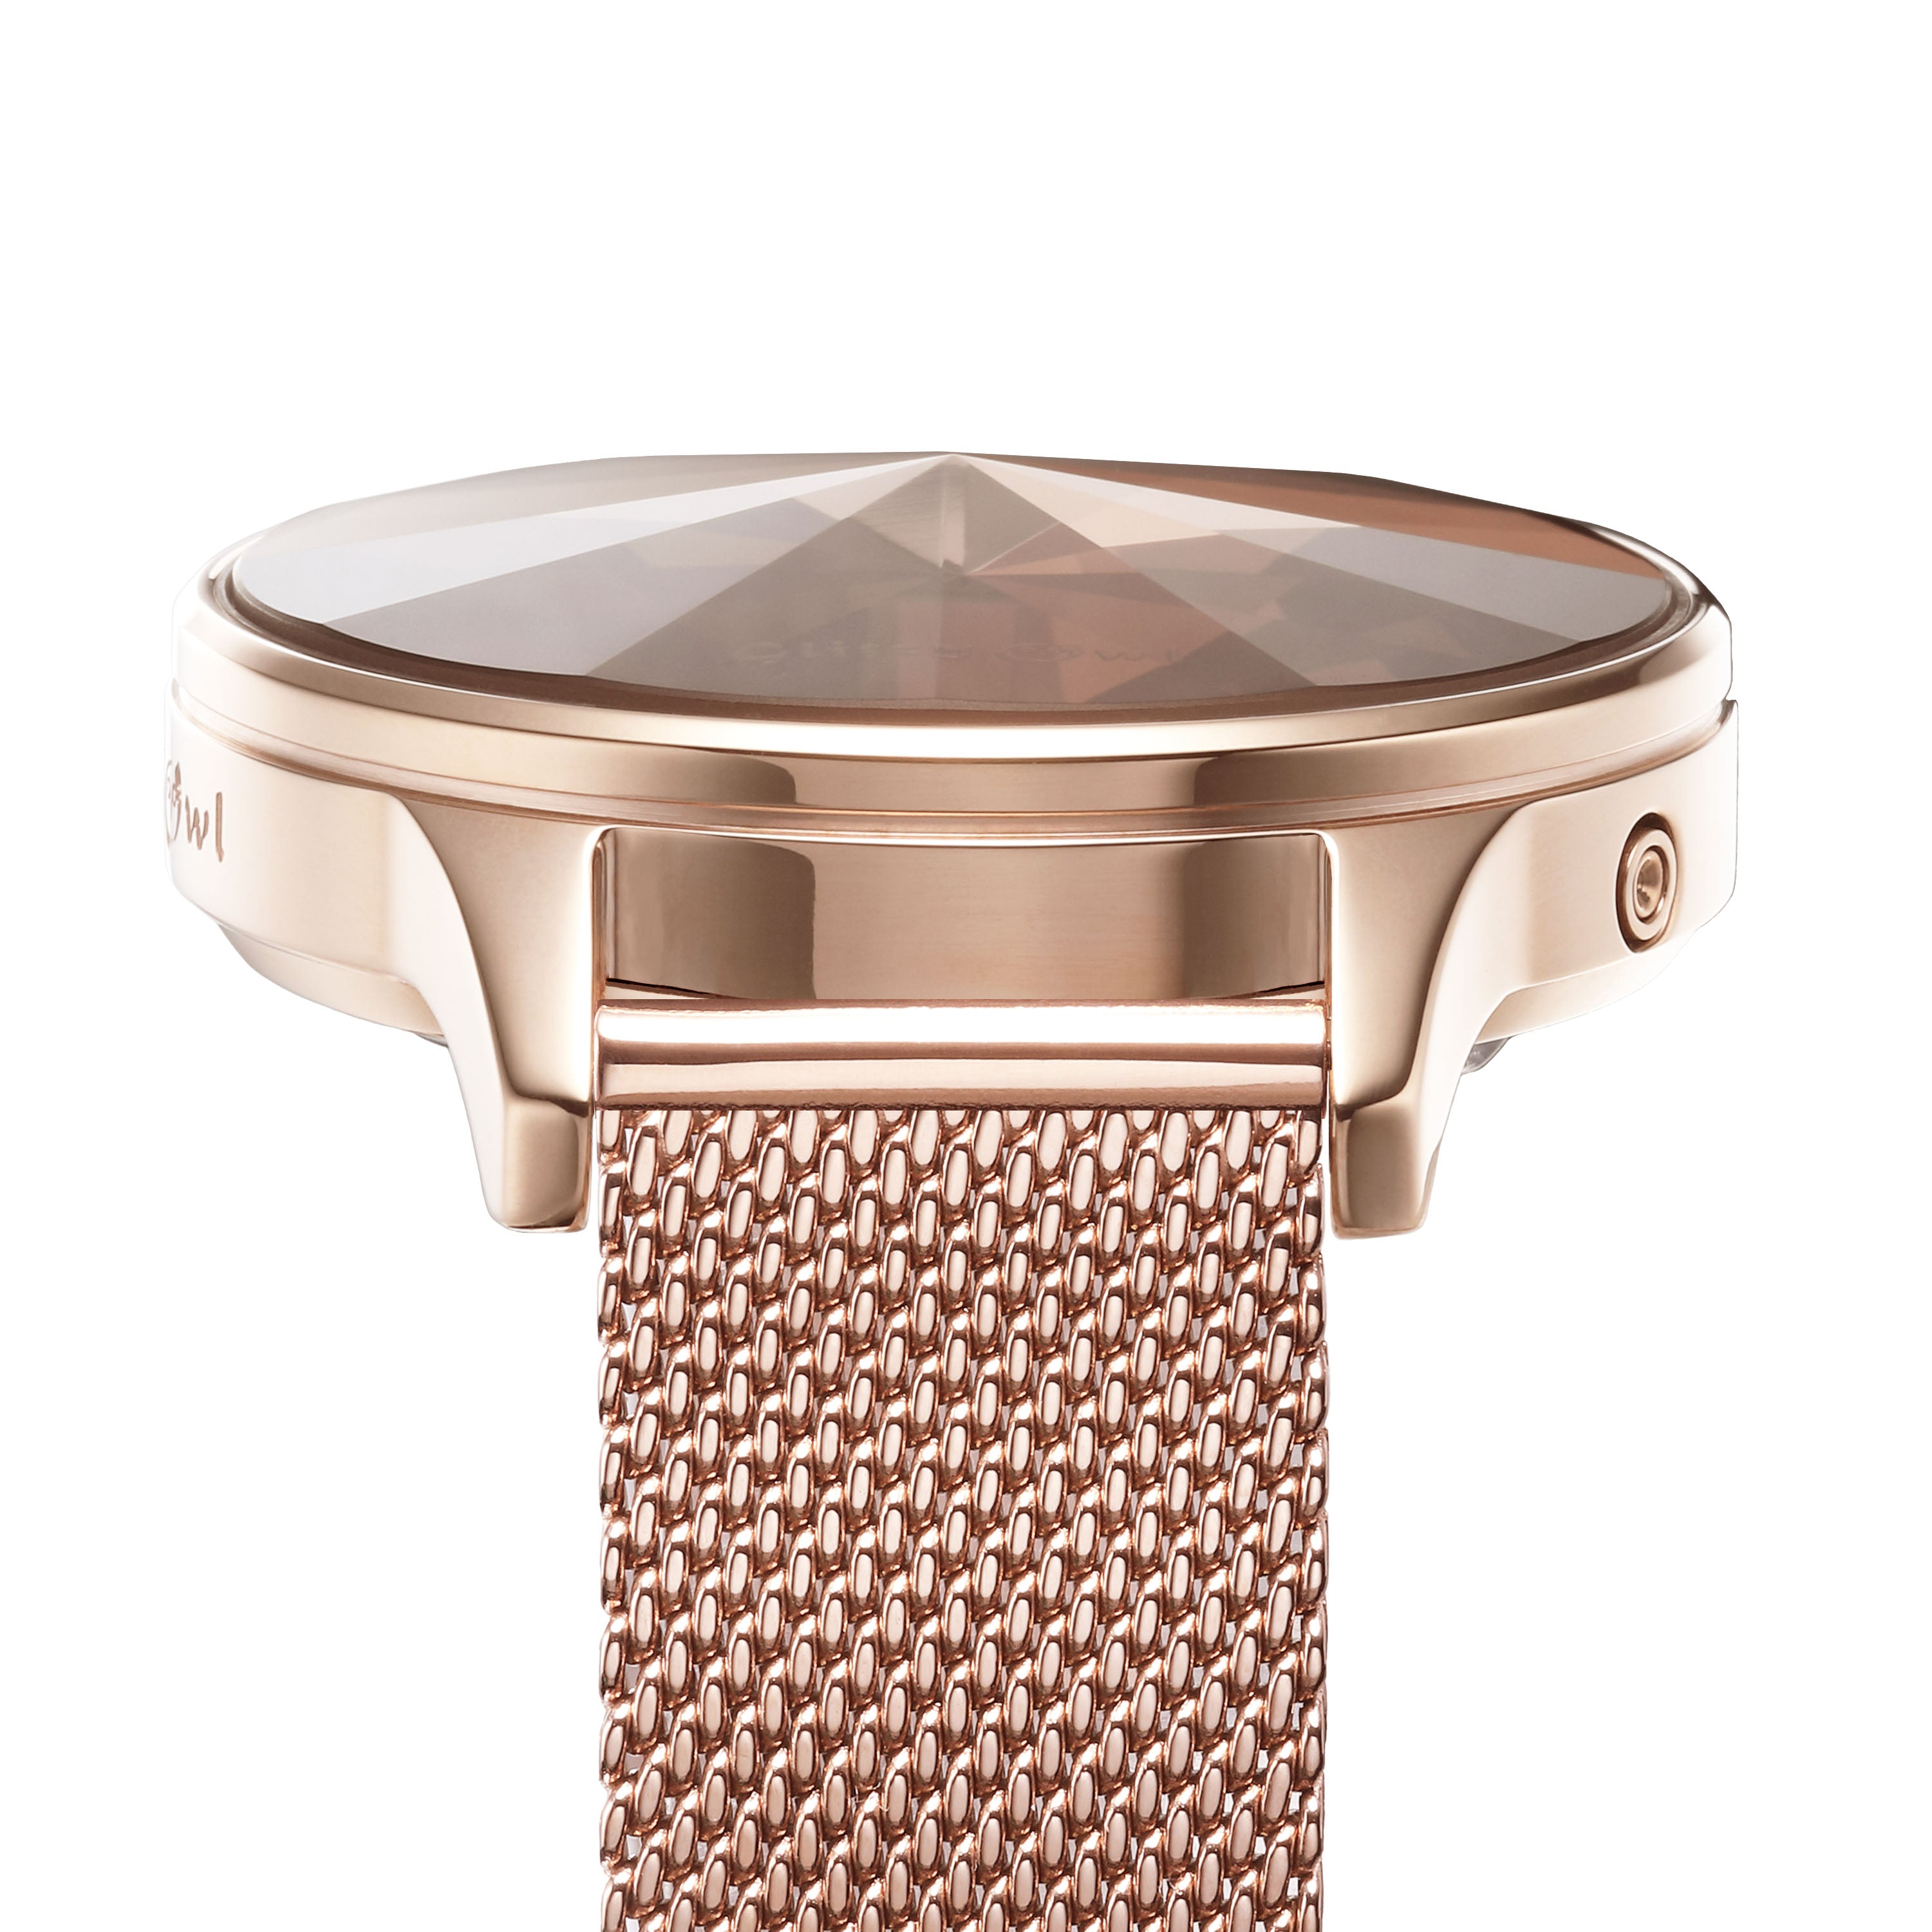 THE DIAMOND LED Rose Gold-Tone Stainless Steel Watch